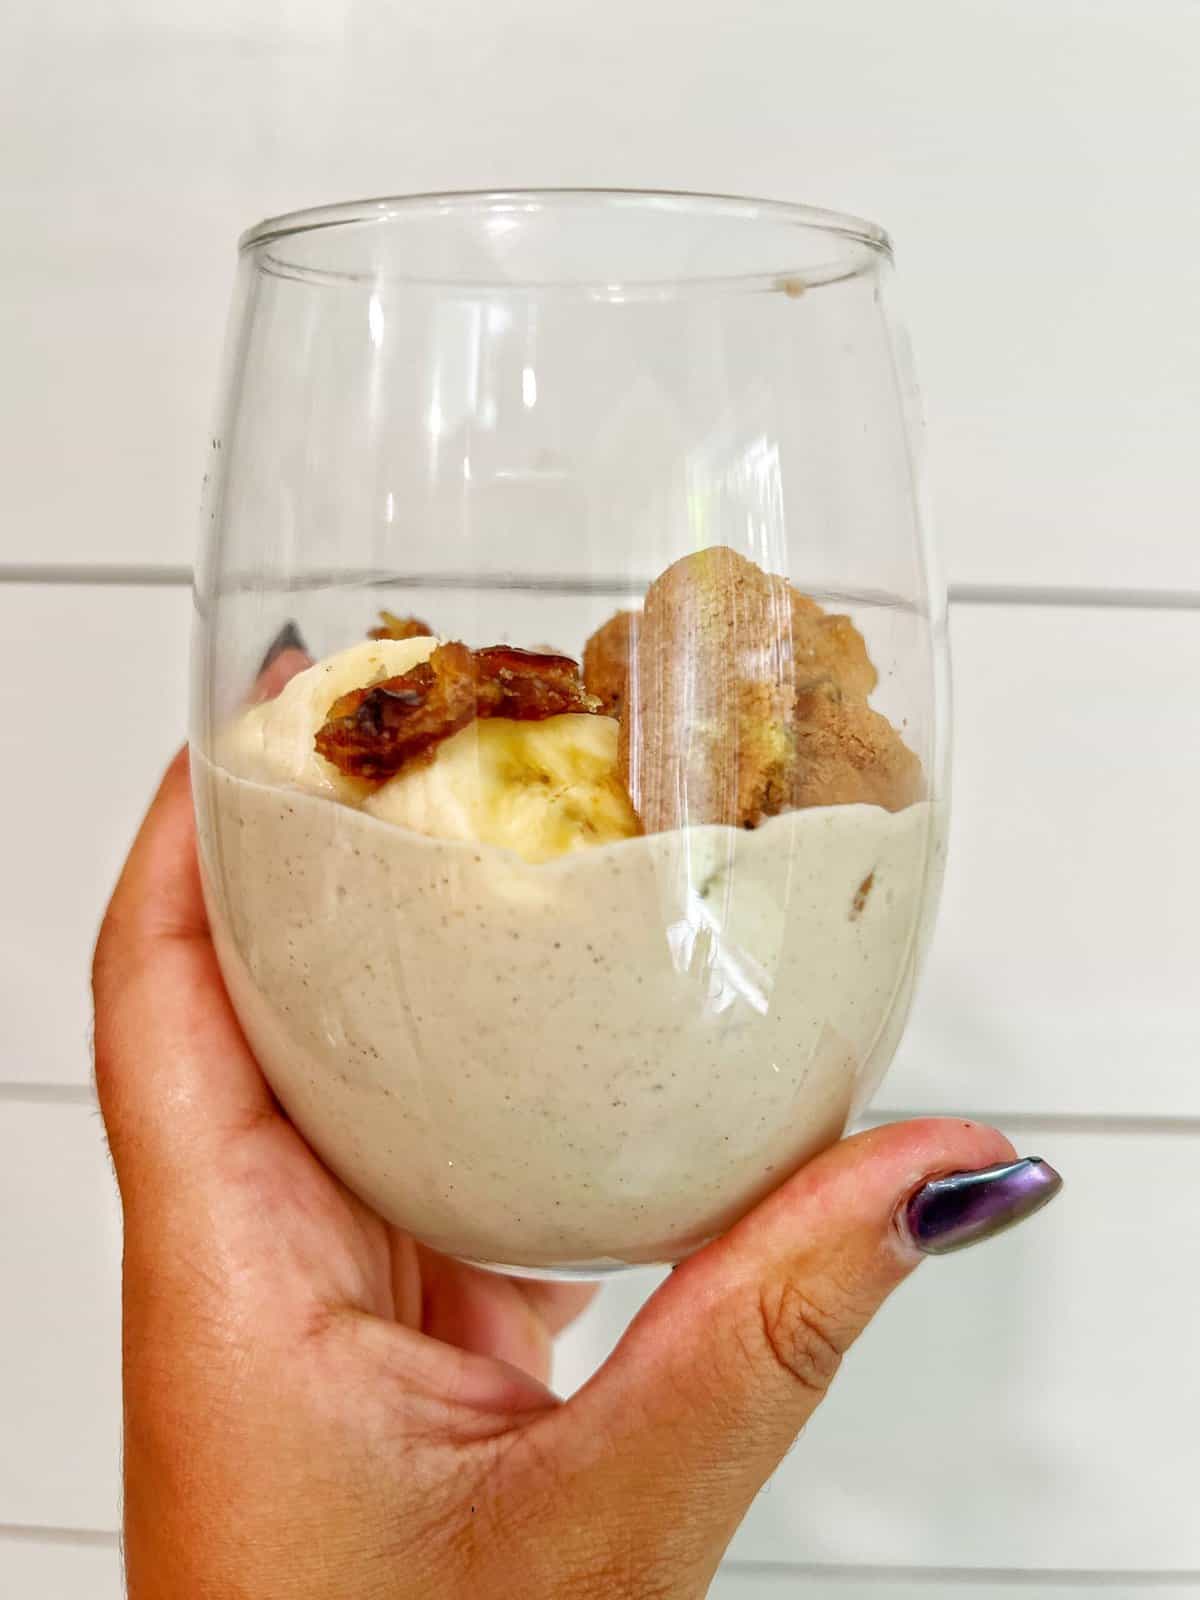 banana pudding served in glass cup being held by hand